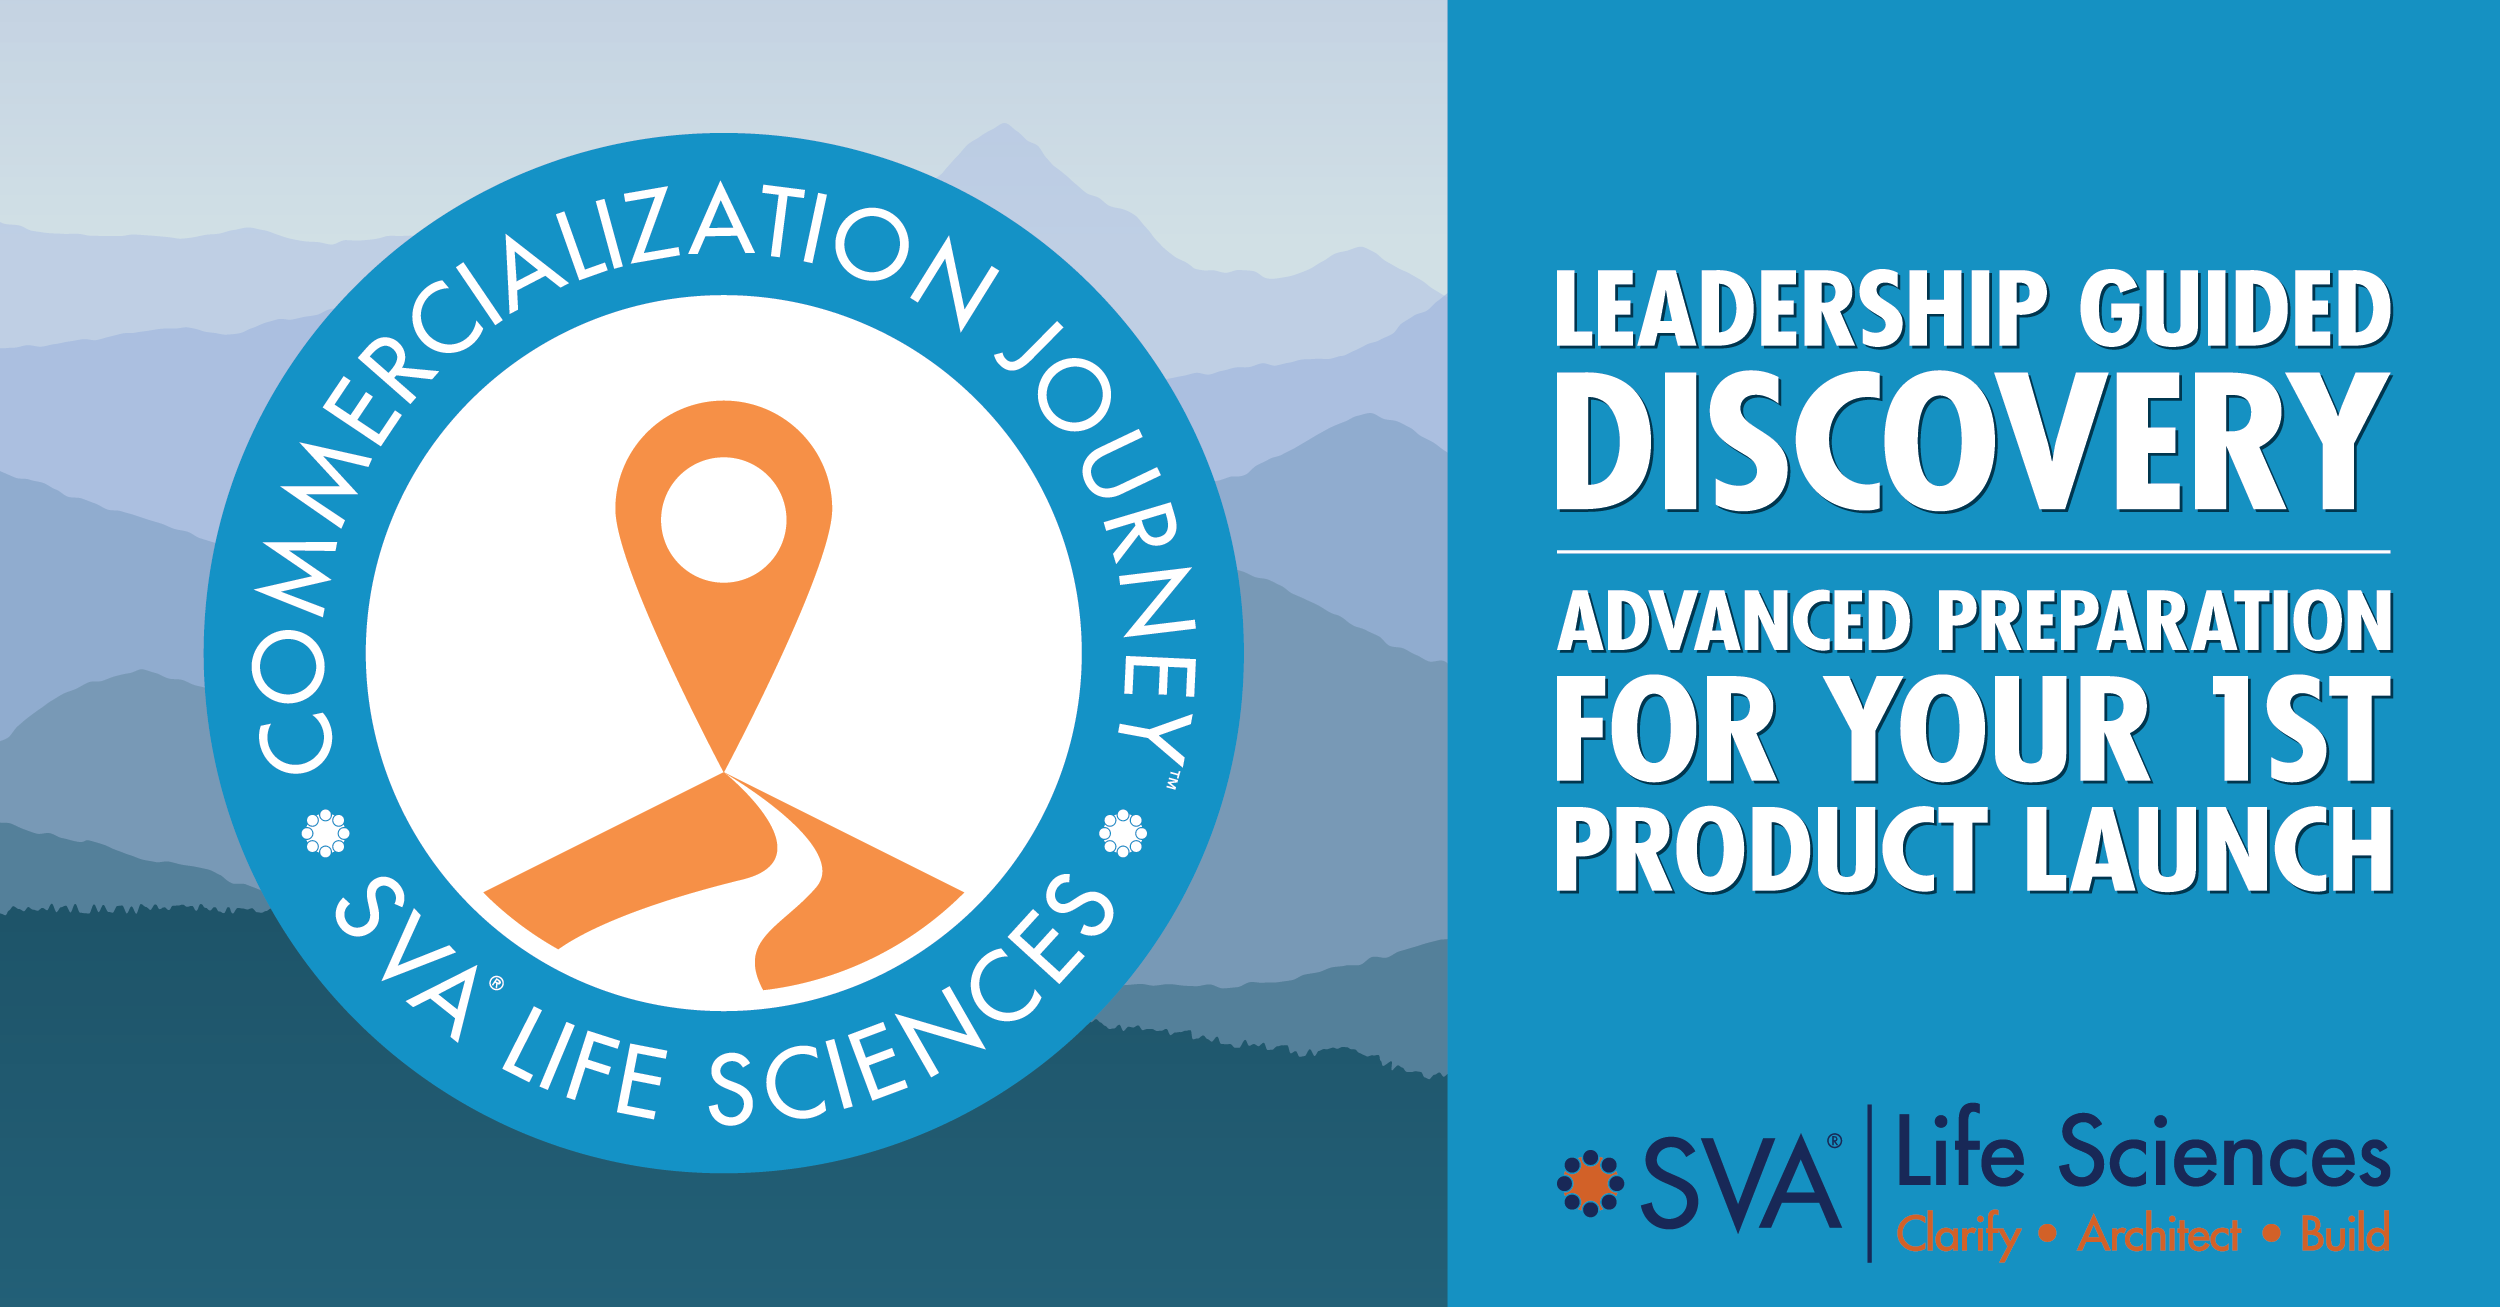 Leadership Guided Discovery - Advanced Preparation for Your 1st Product Launch